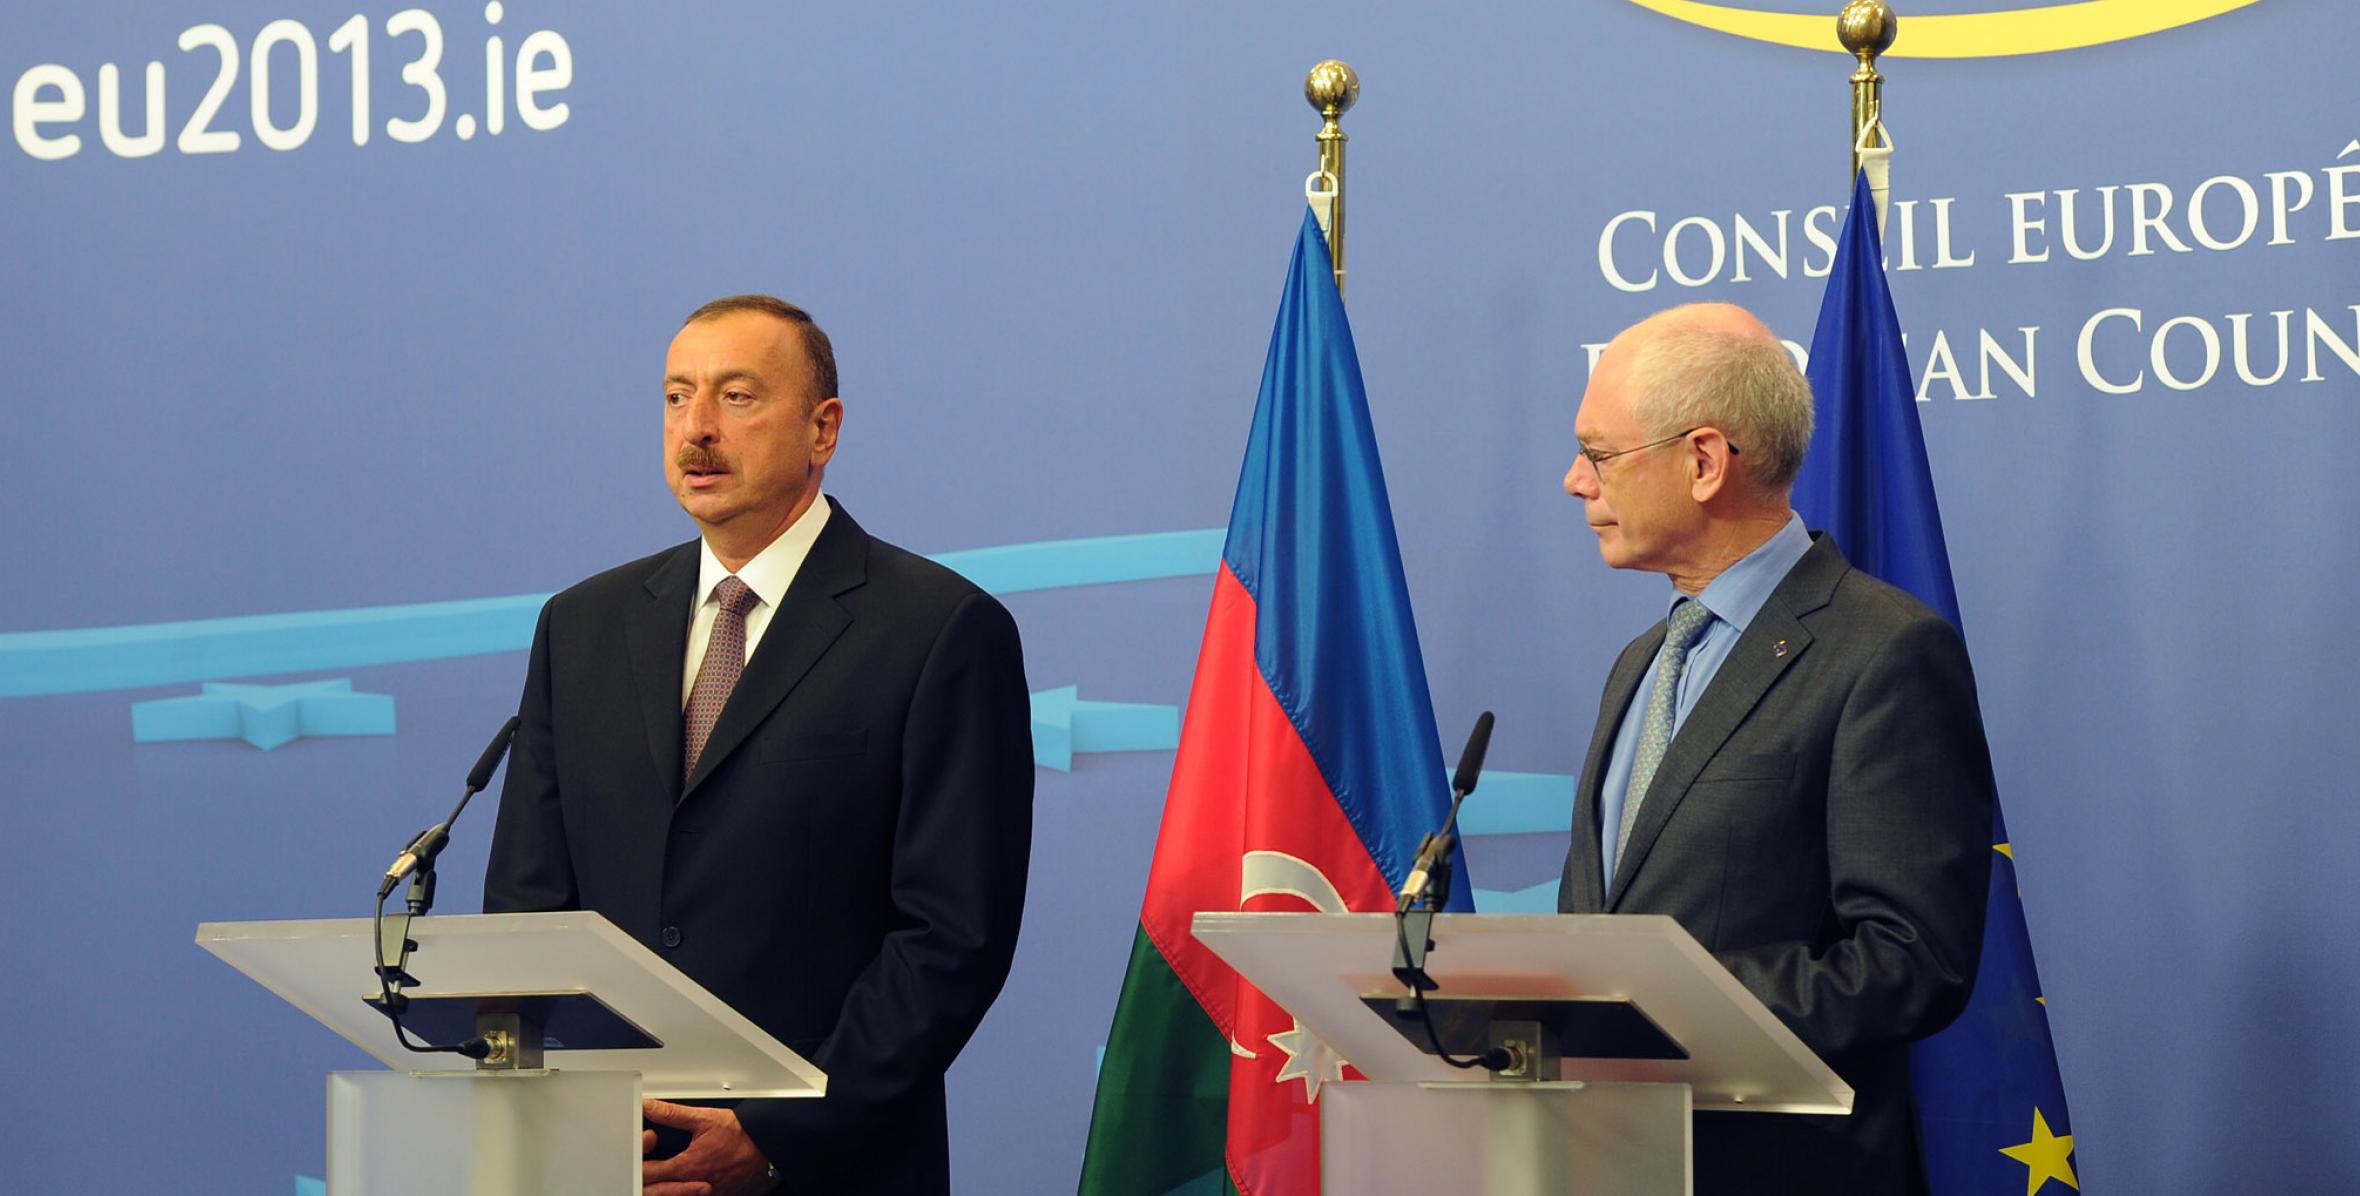 Ilham Aliyev and President of the European Council Herman Van Rompuy made statements for the press